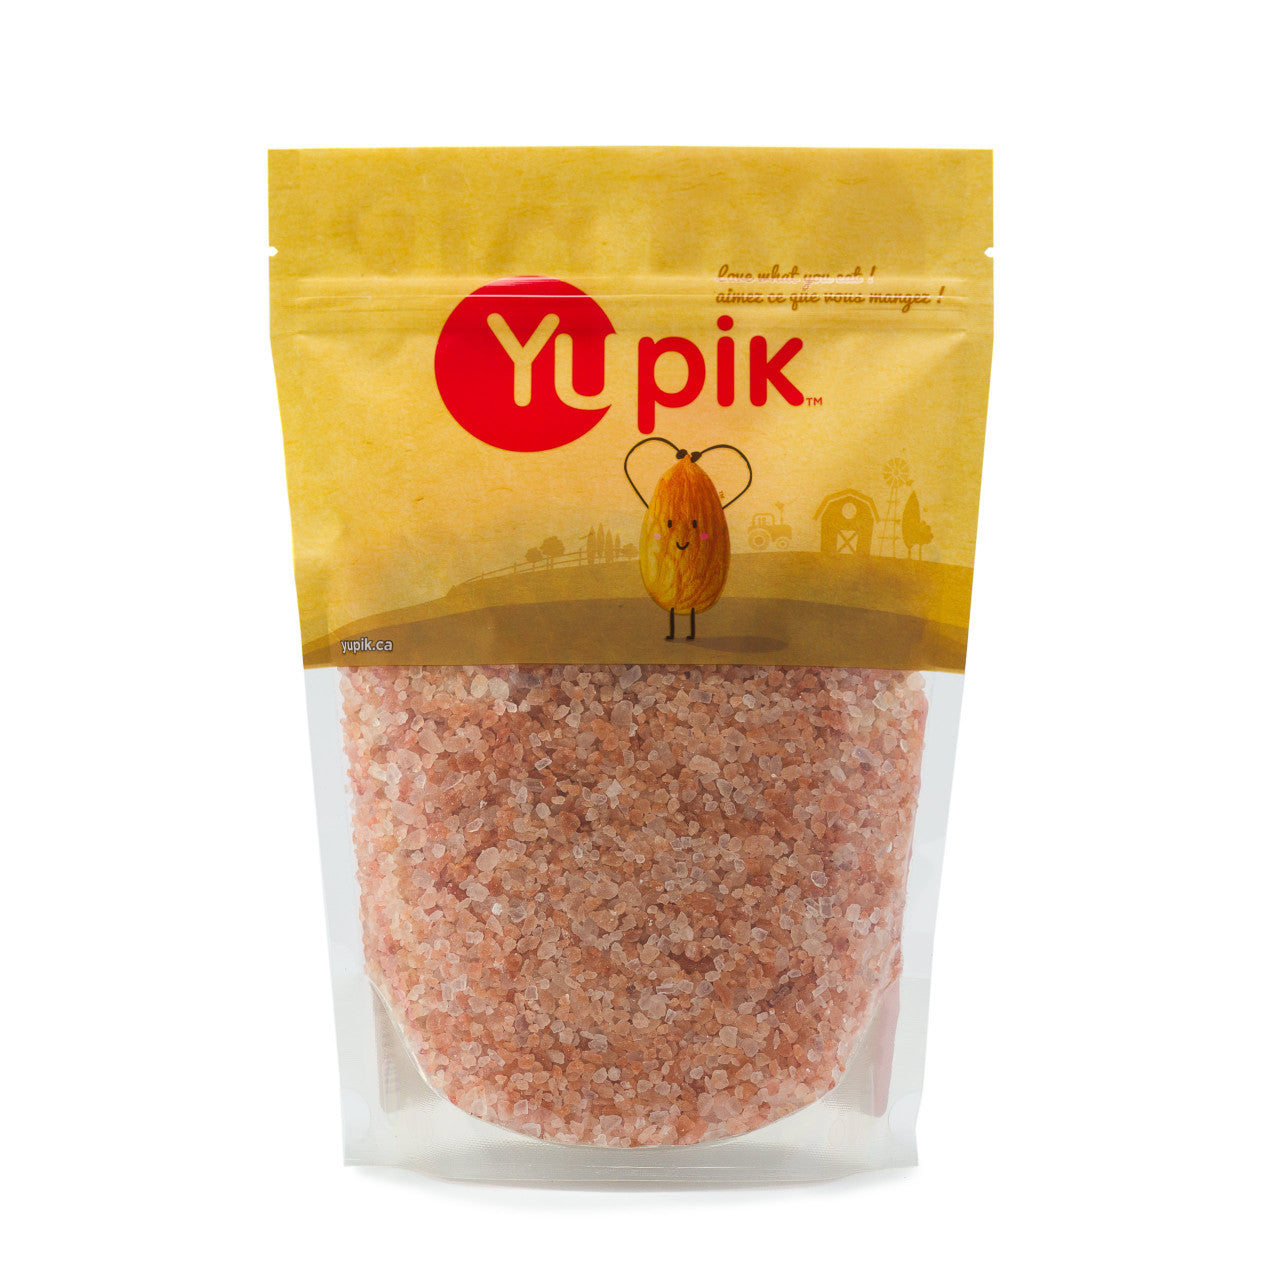 Yupik Himalayan Pink Salt, 1Kg/2.2 lbs {Imported from Canada}